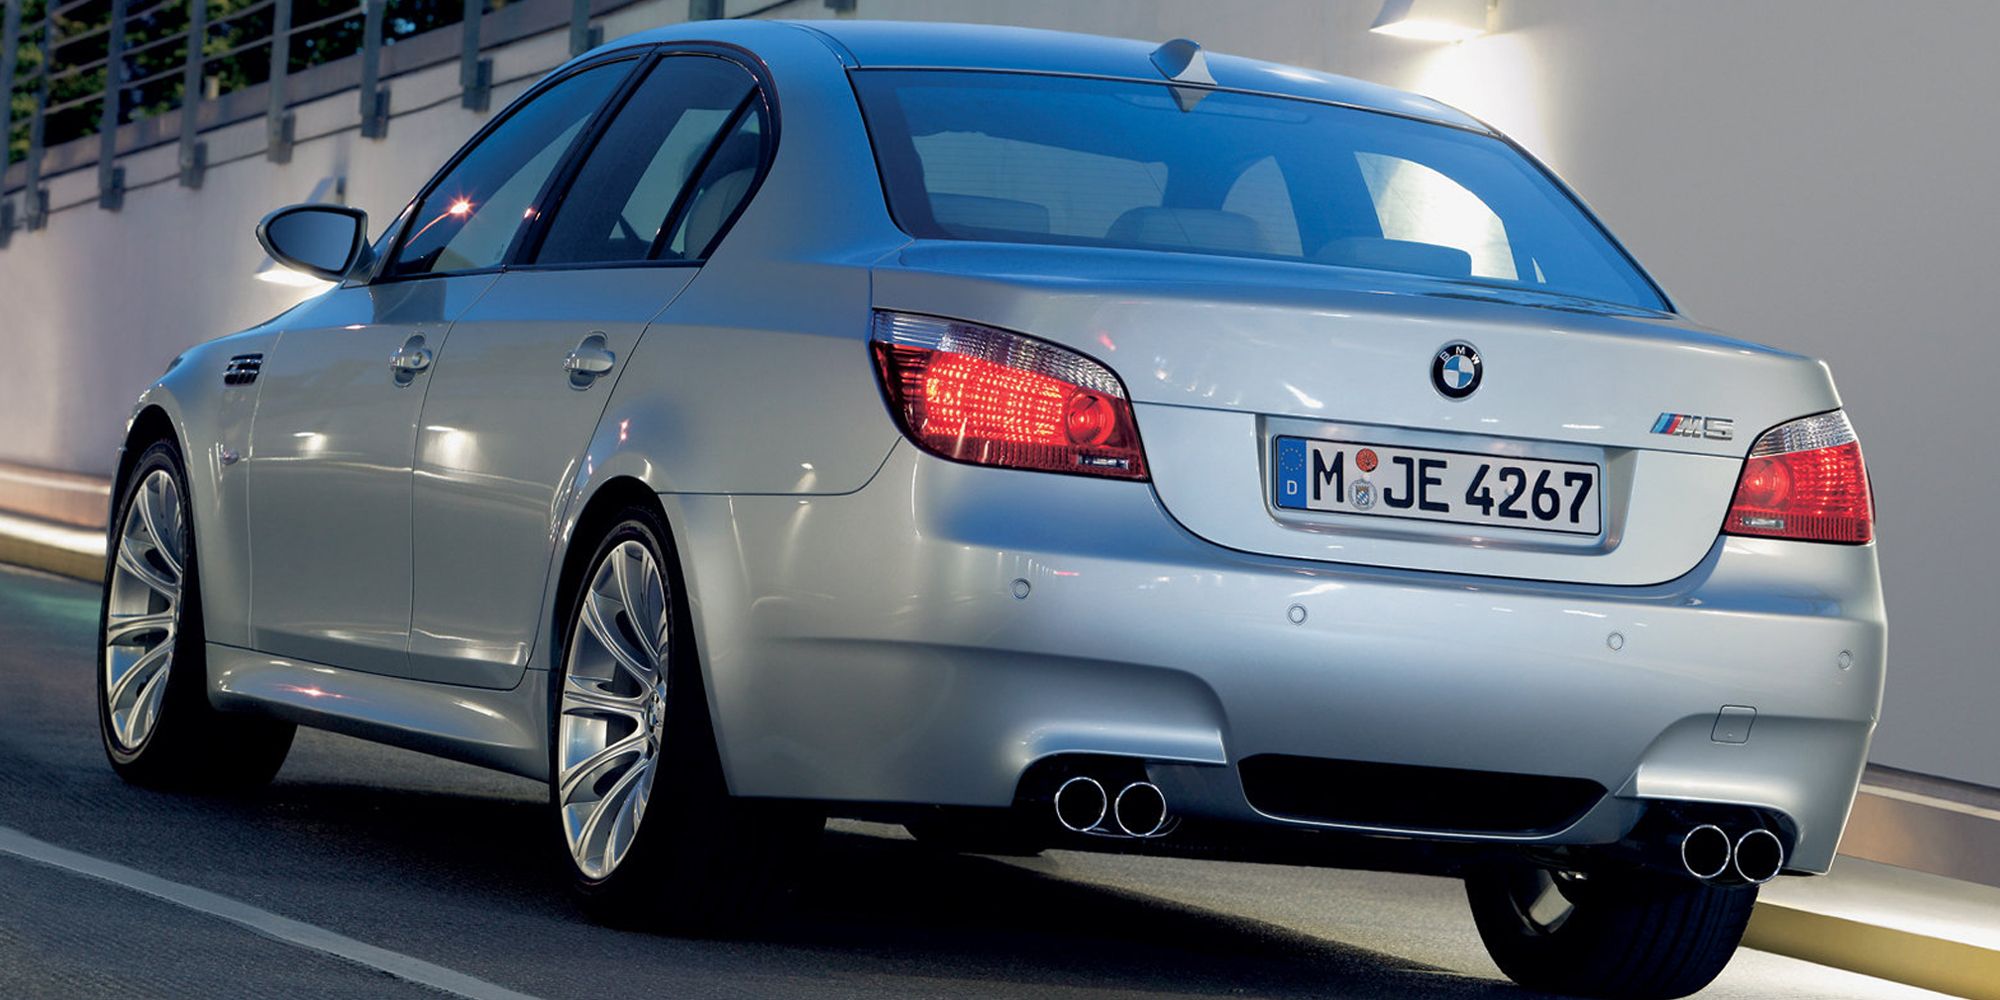 10 Reasons Why Gearheads Who Need A Practical Car Should Pick The BMW M5